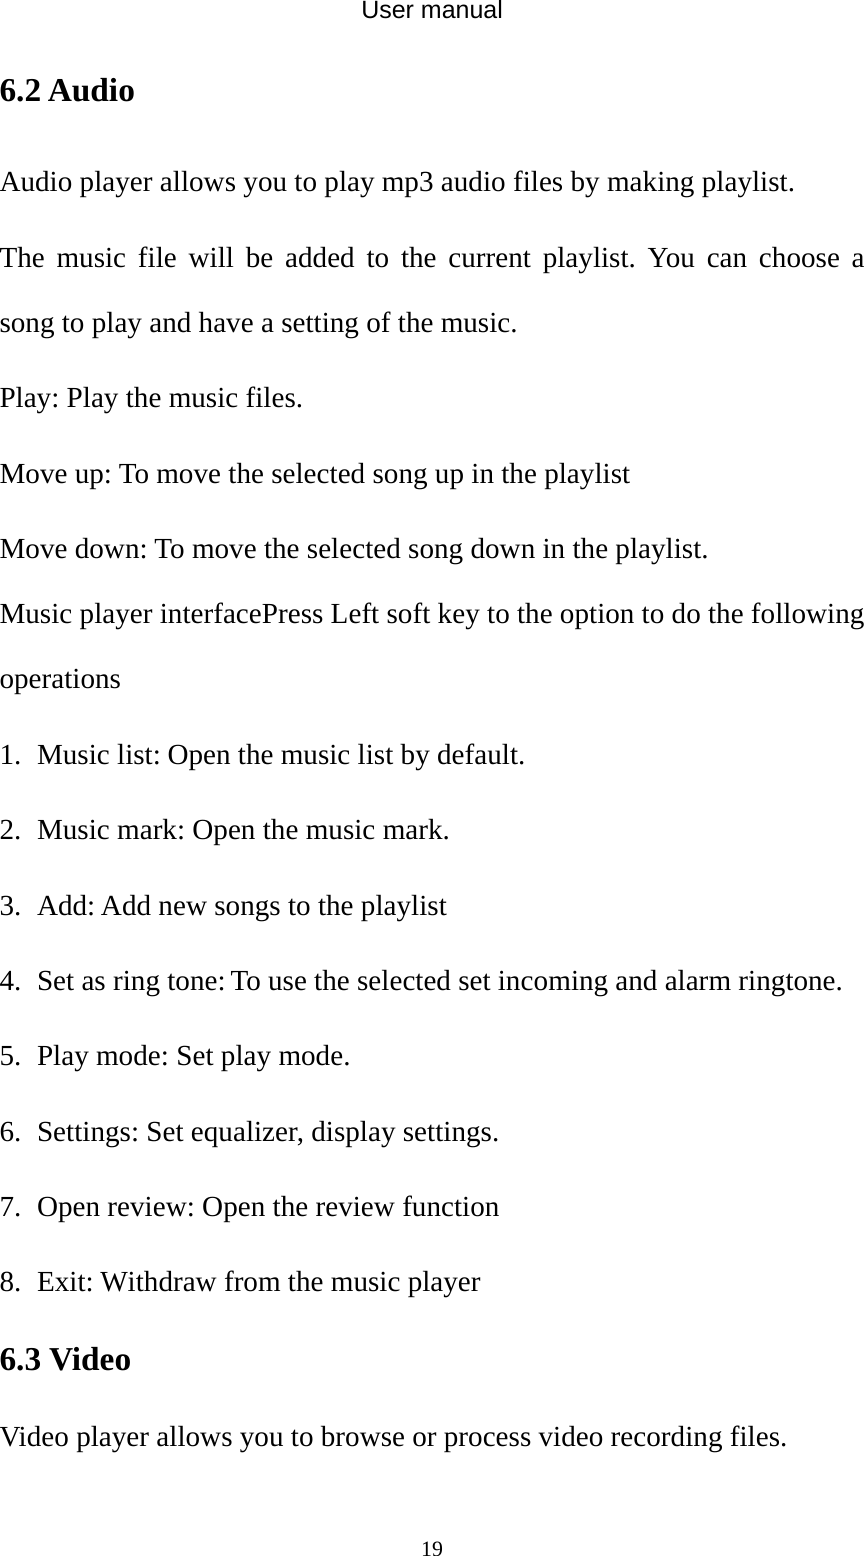 User manual  196.2 Audio Audio player allows you to play mp3 audio files by making playlist. The music file will be added to the current playlist. You can choose a song to play and have a setting of the music. Play: Play the music files. Move up: To move the selected song up in the playlist Move down: To move the selected song down in the playlist. Music player interfacePress Left soft key to the option to do the following operations 1. Music list: Open the music list by default. 2. Music mark: Open the music mark. 3. Add: Add new songs to the playlist 4. Set as ring tone: To use the selected set incoming and alarm ringtone. 5. Play mode: Set play mode. 6. Settings: Set equalizer, display settings. 7. Open review: Open the review function 8. Exit: Withdraw from the music player 6.3 Video   Video player allows you to browse or process video recording files.   